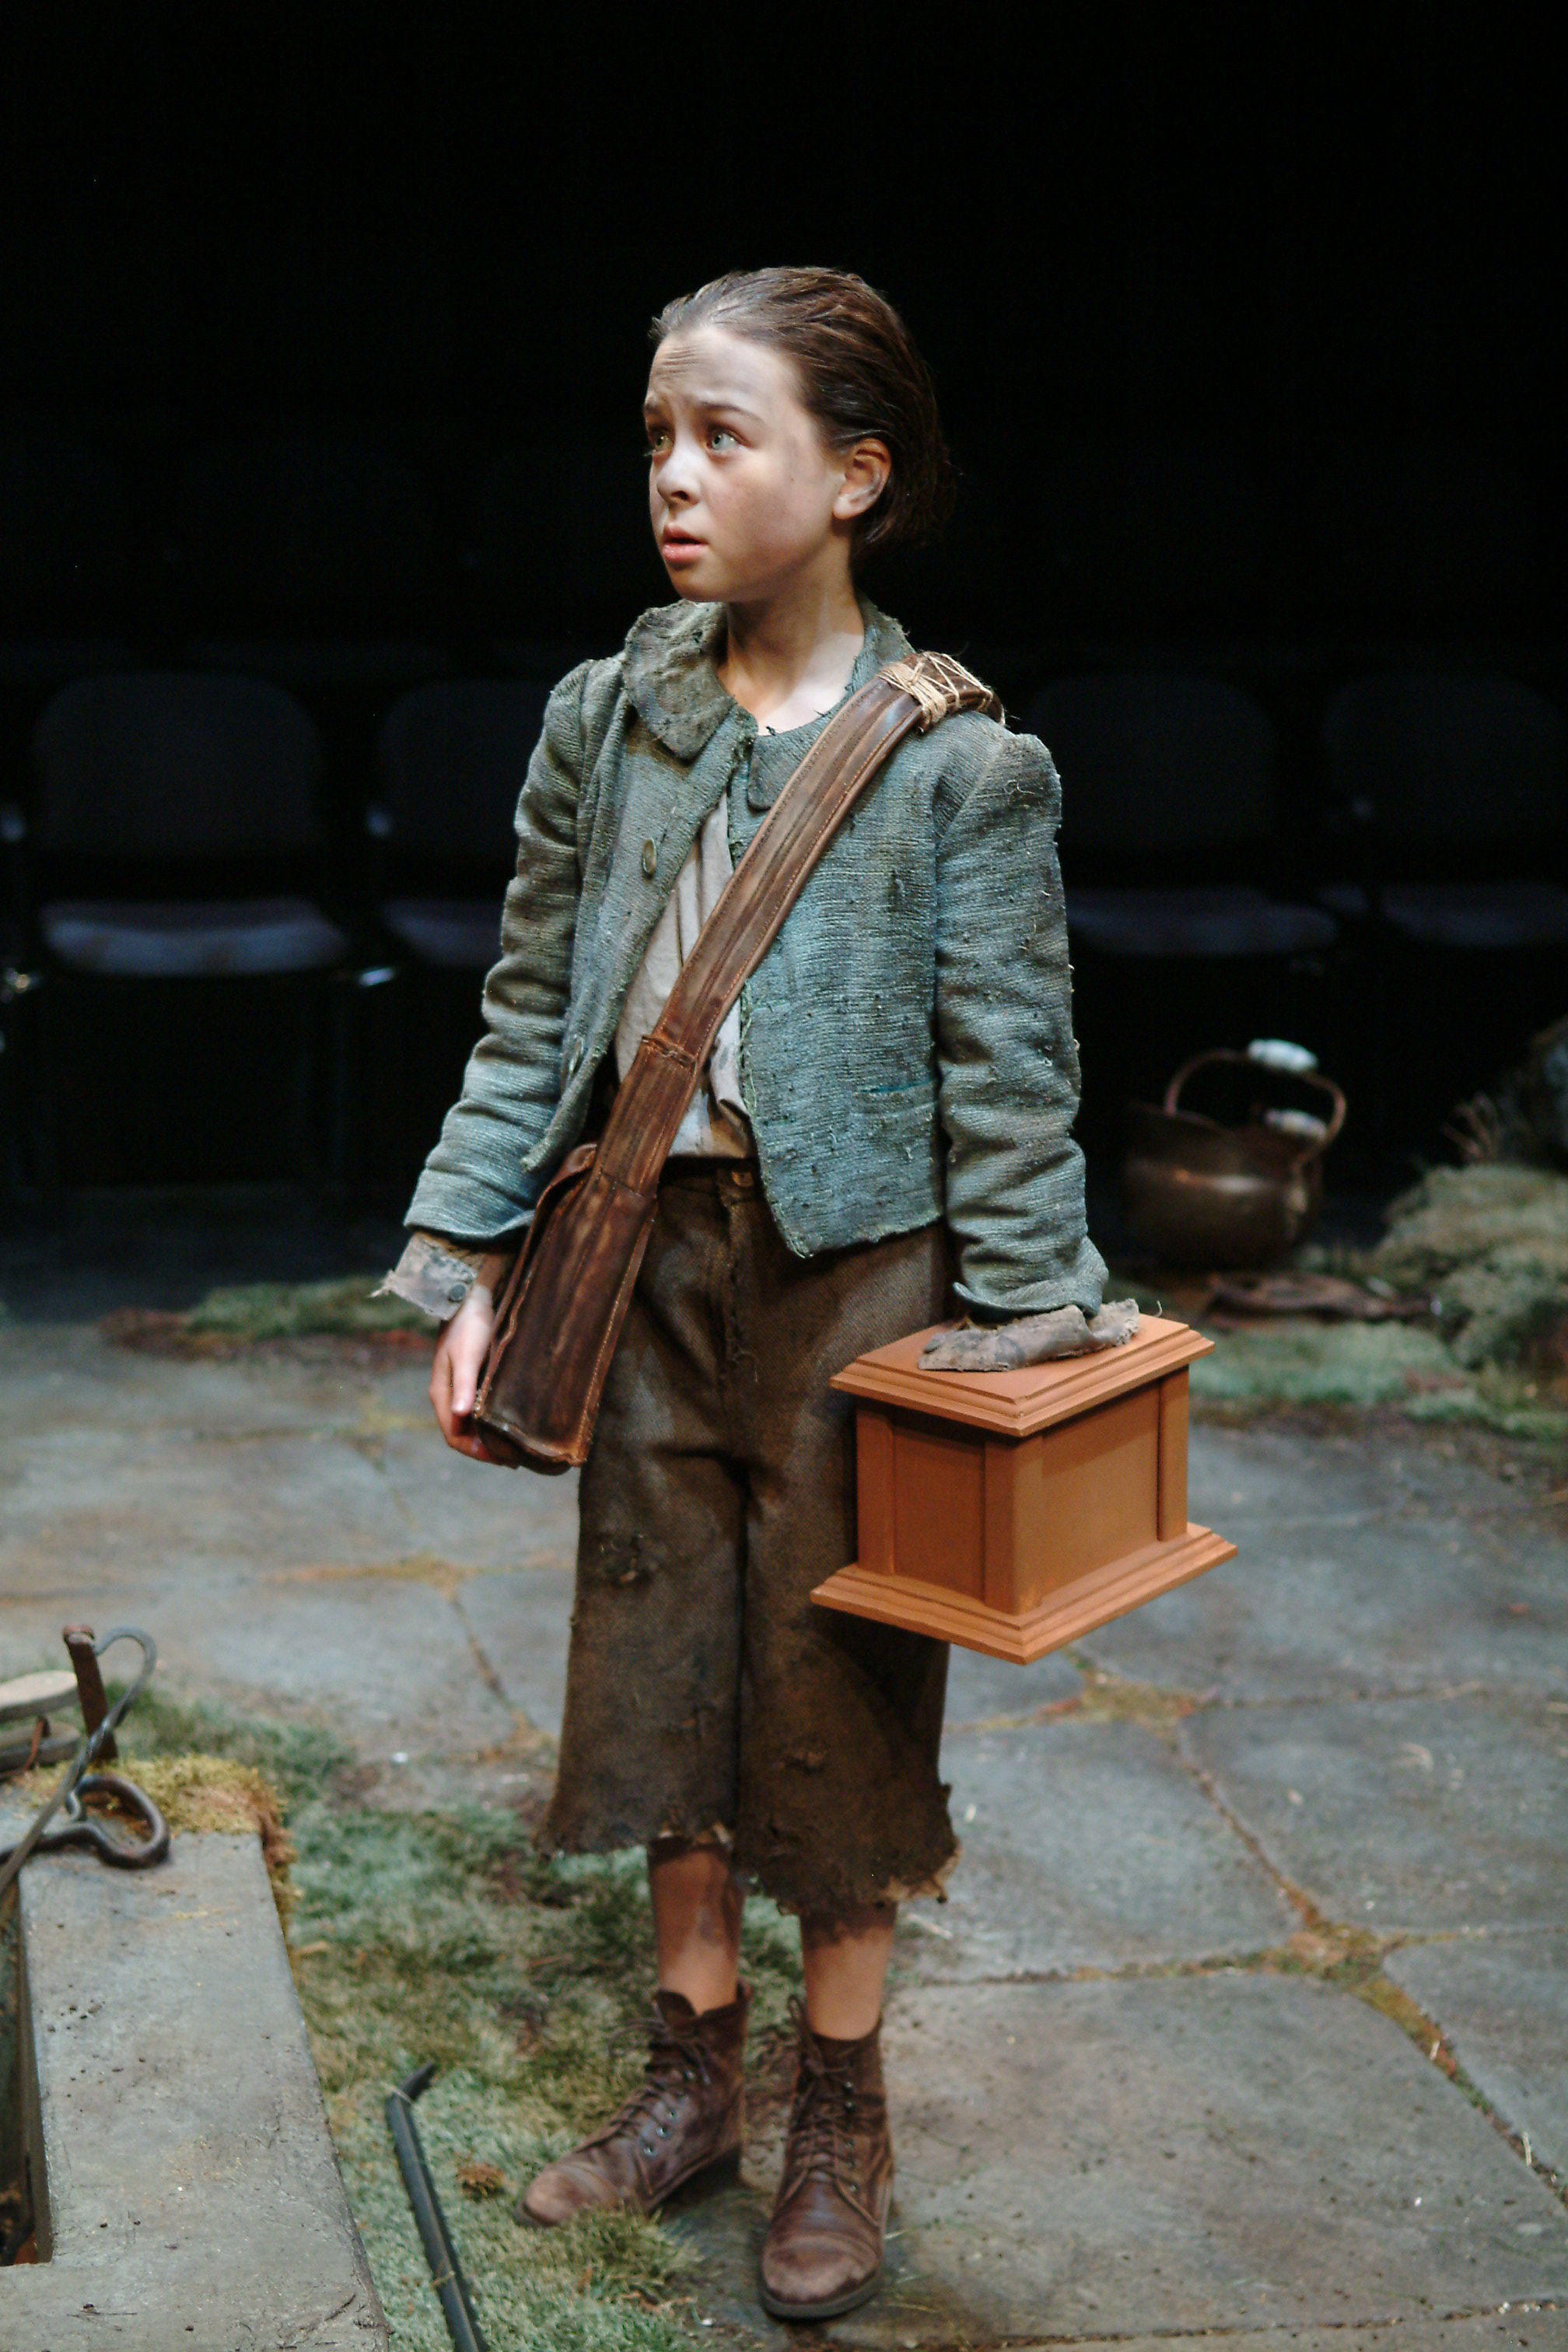 Abigail as the young lad Wicker Griggs in The Wooden Breeks